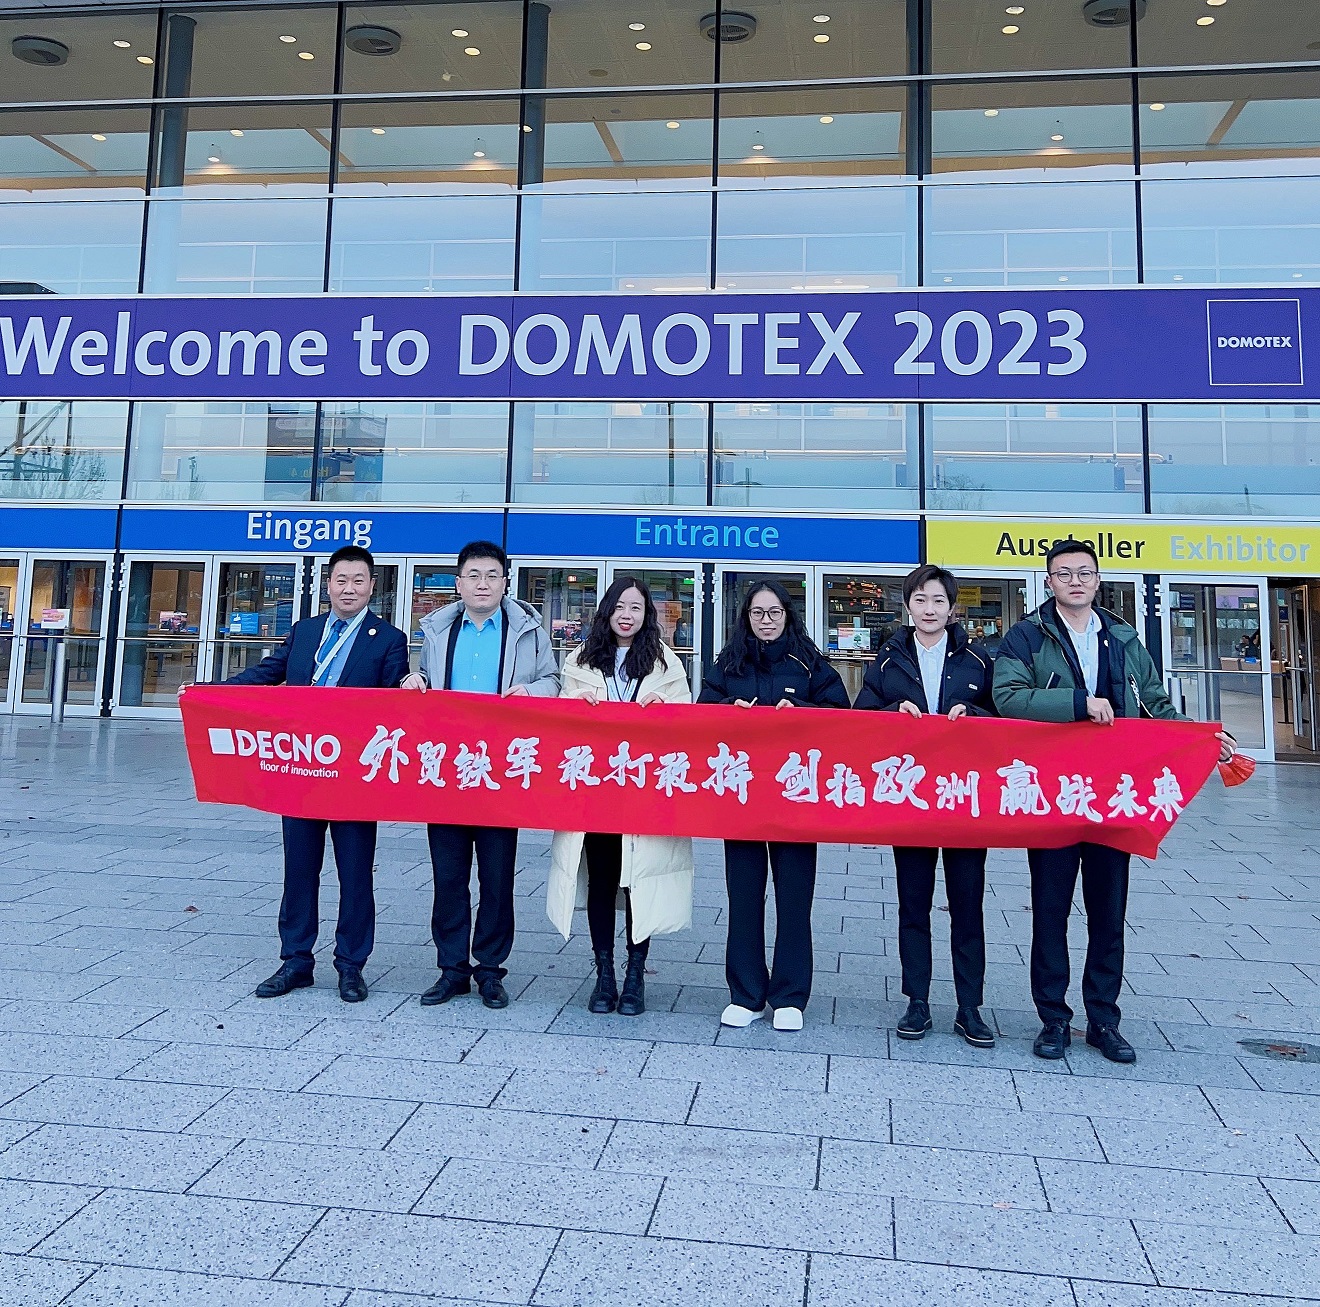 DOMOTEX Hannover 2023 | Perfektes Ende und Neuer Anfang